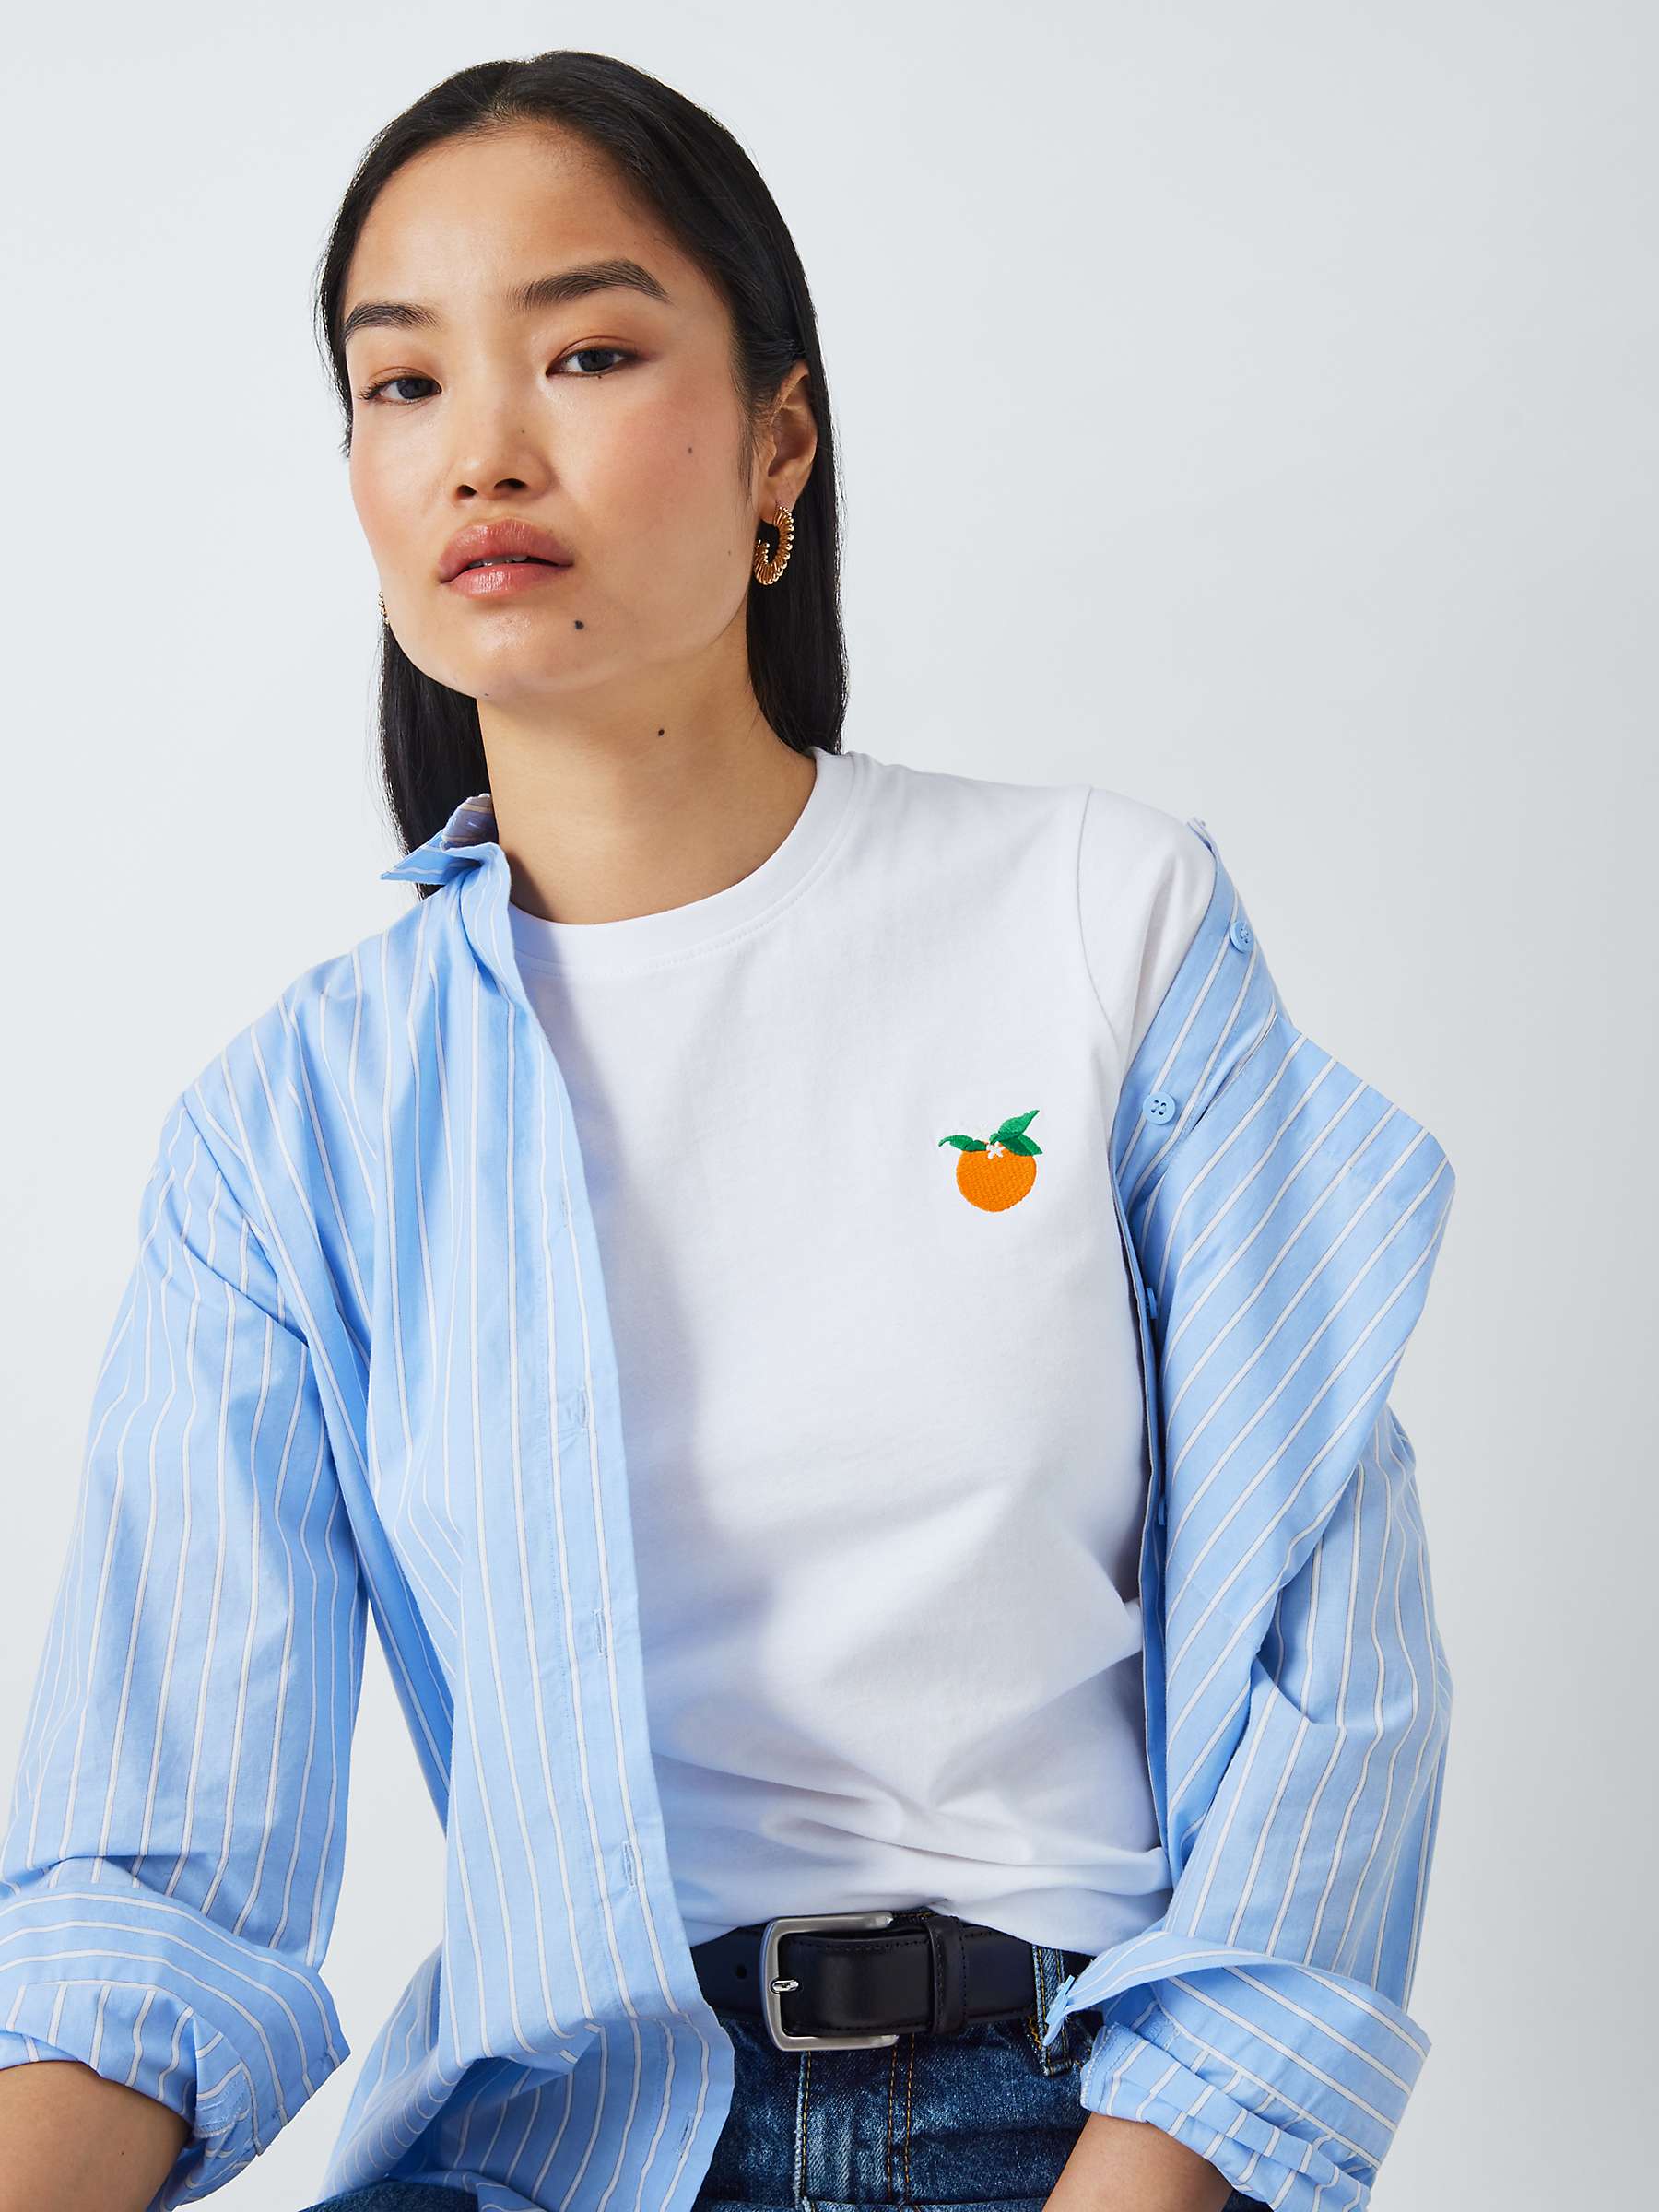 Buy John Lewis ANYDAY Embroidered Peach T-Shirt, White Online at johnlewis.com